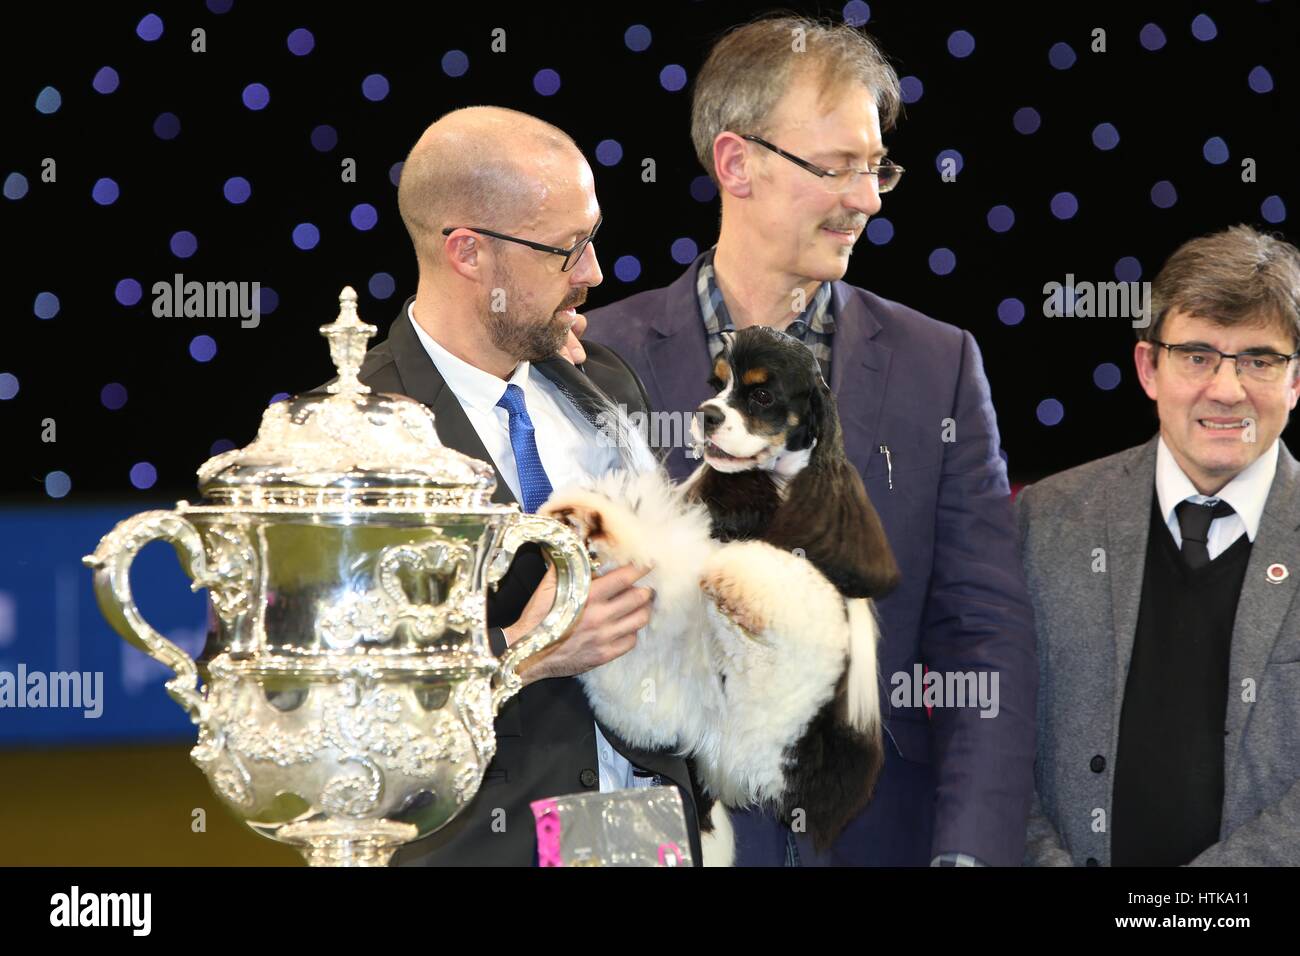 Crufts Best in Show, Birmingham, UK. 12th Mar, 2017. Crufts 2017 Champion Afterglow Miami Ink, an American Cocker Spaniel from Blackpool shown by Jason Lynn who is the joint owner of Miami with Rui Da Silva. Credit: Jon Freeman/Alamy Live News Stock Photo